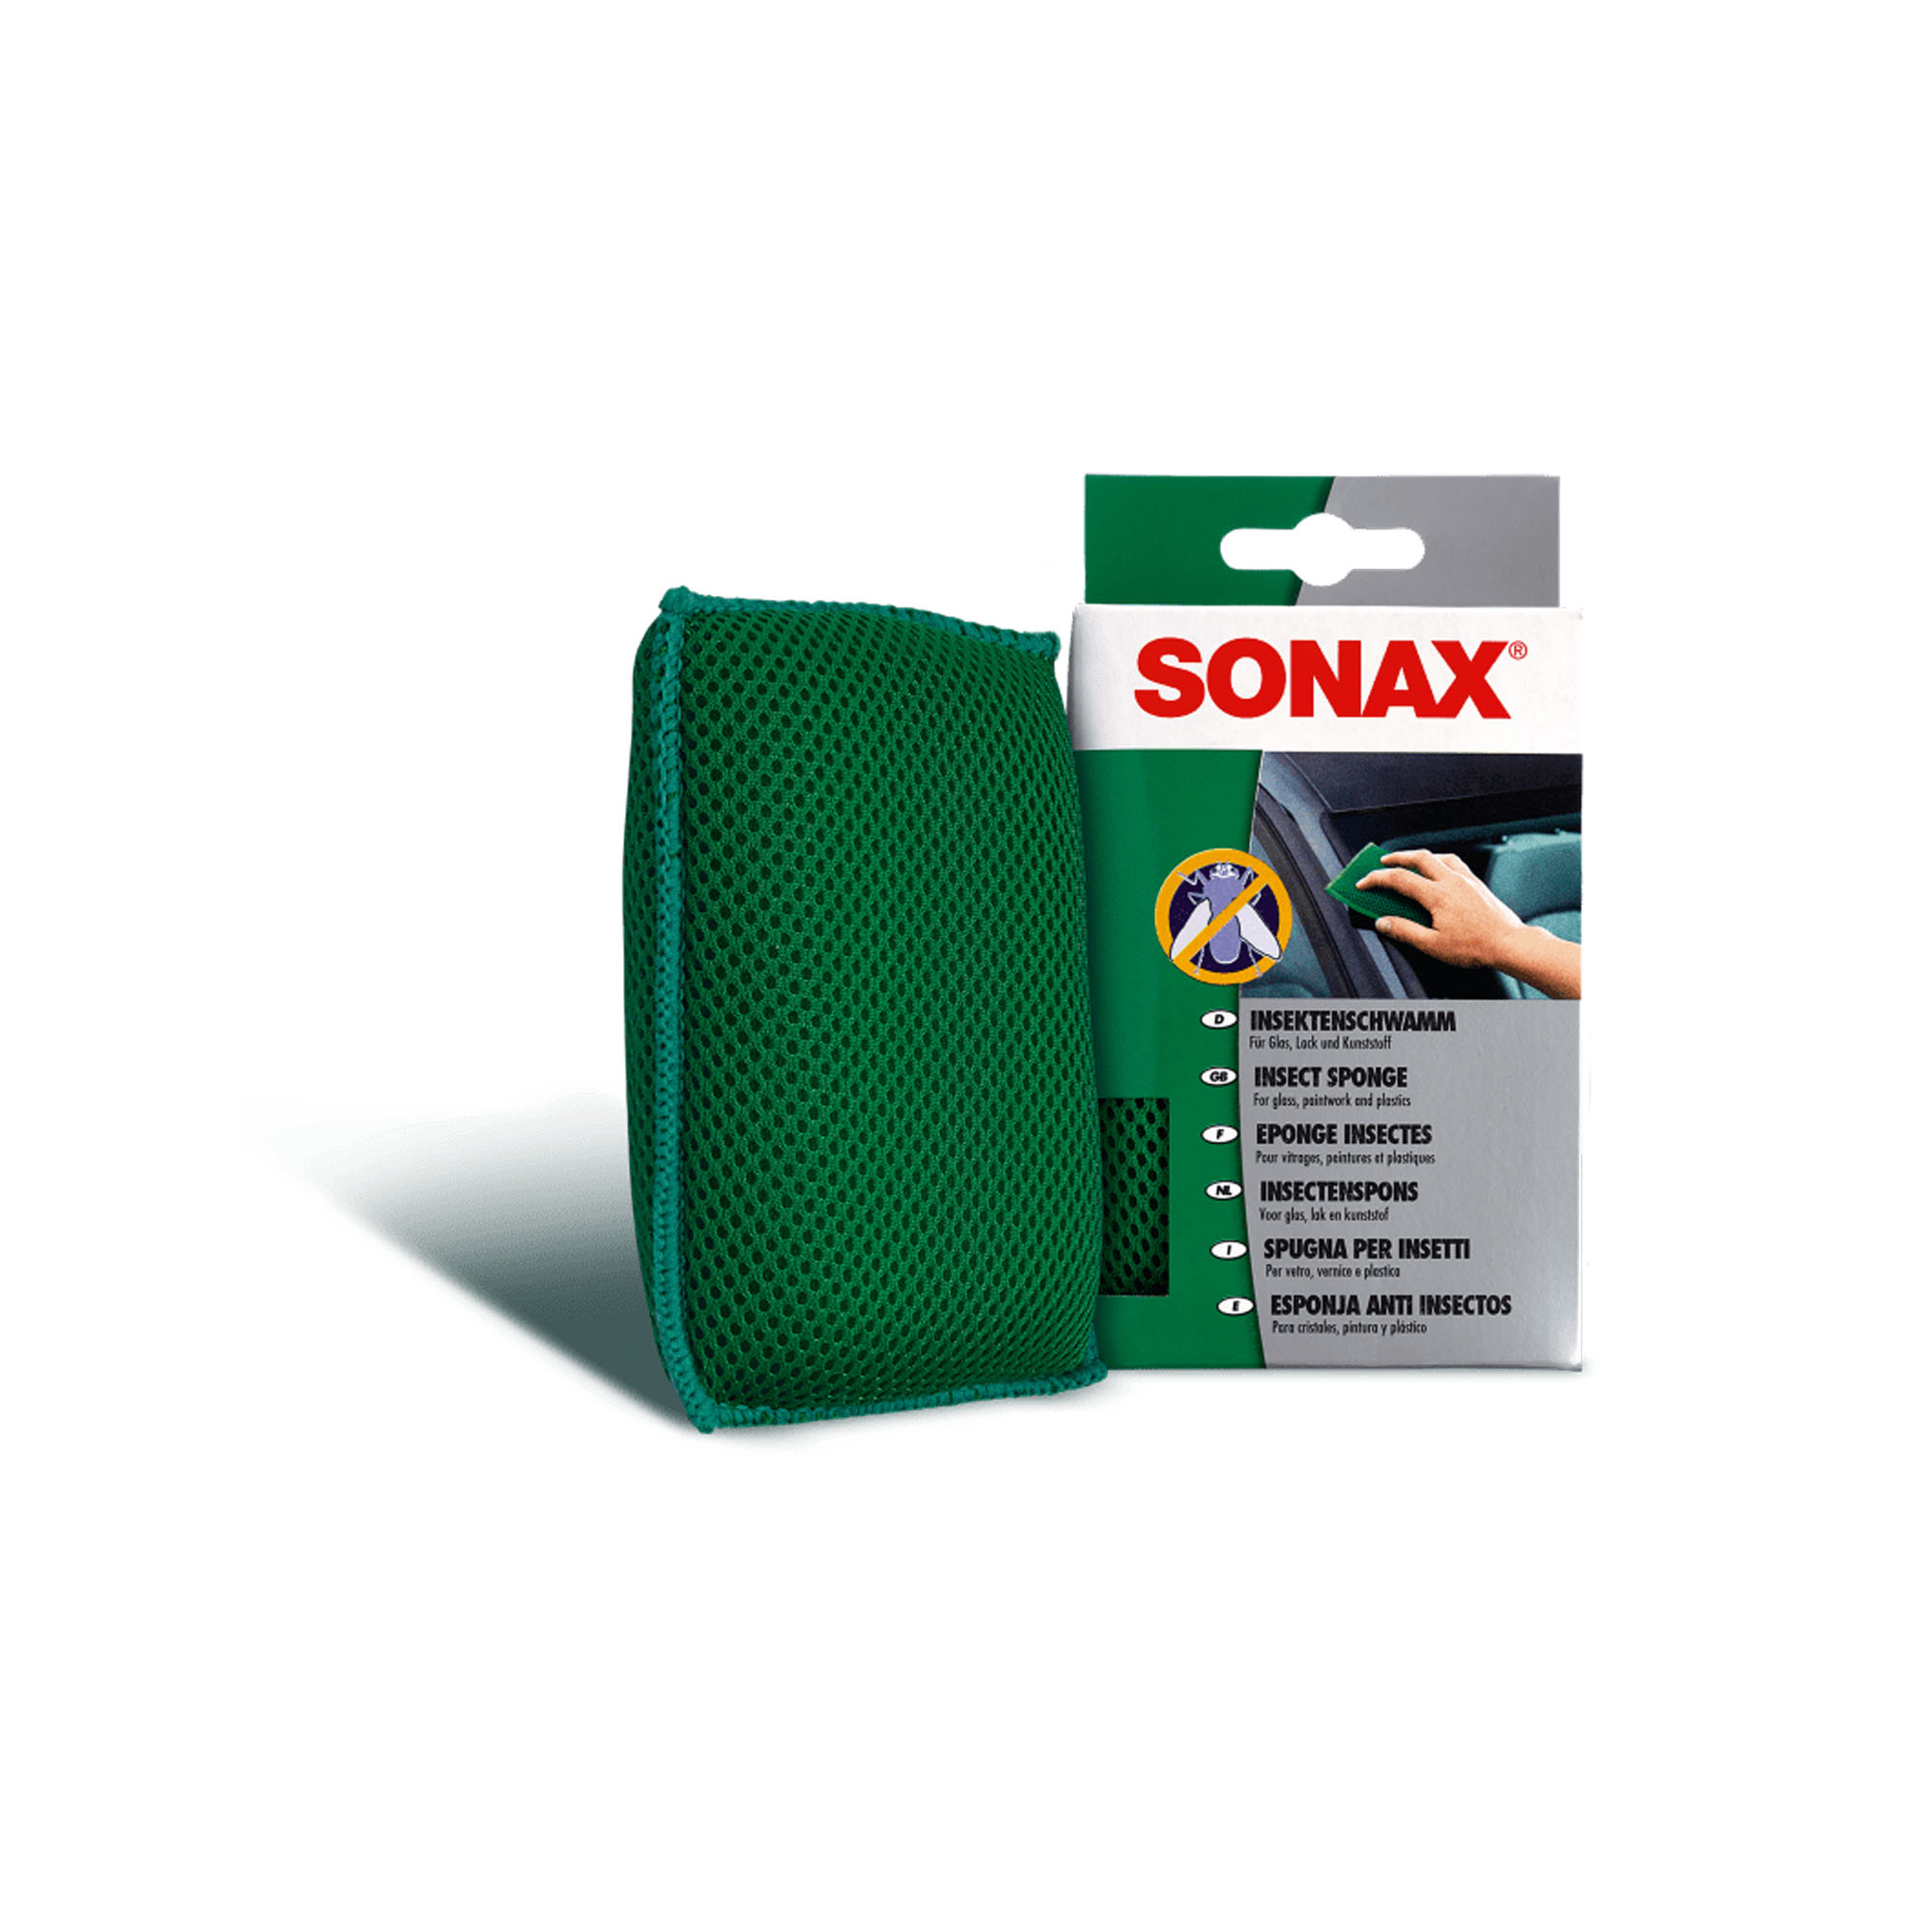 Sonax Sponge for Insects